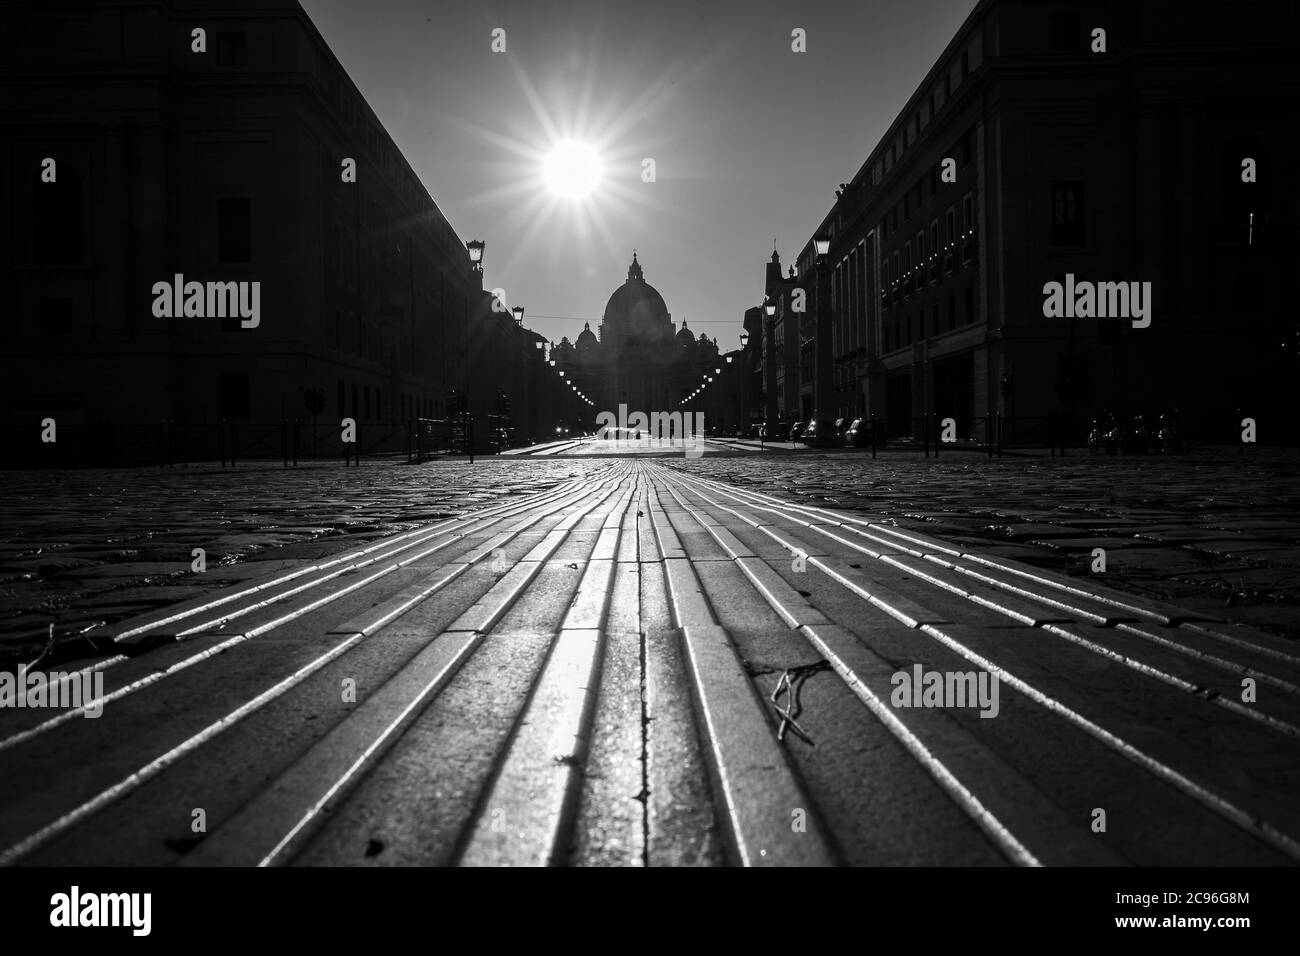 Lockdown in Saint Peter's square during COVID-19 epidemic. Rome, Italy. Stock Photo